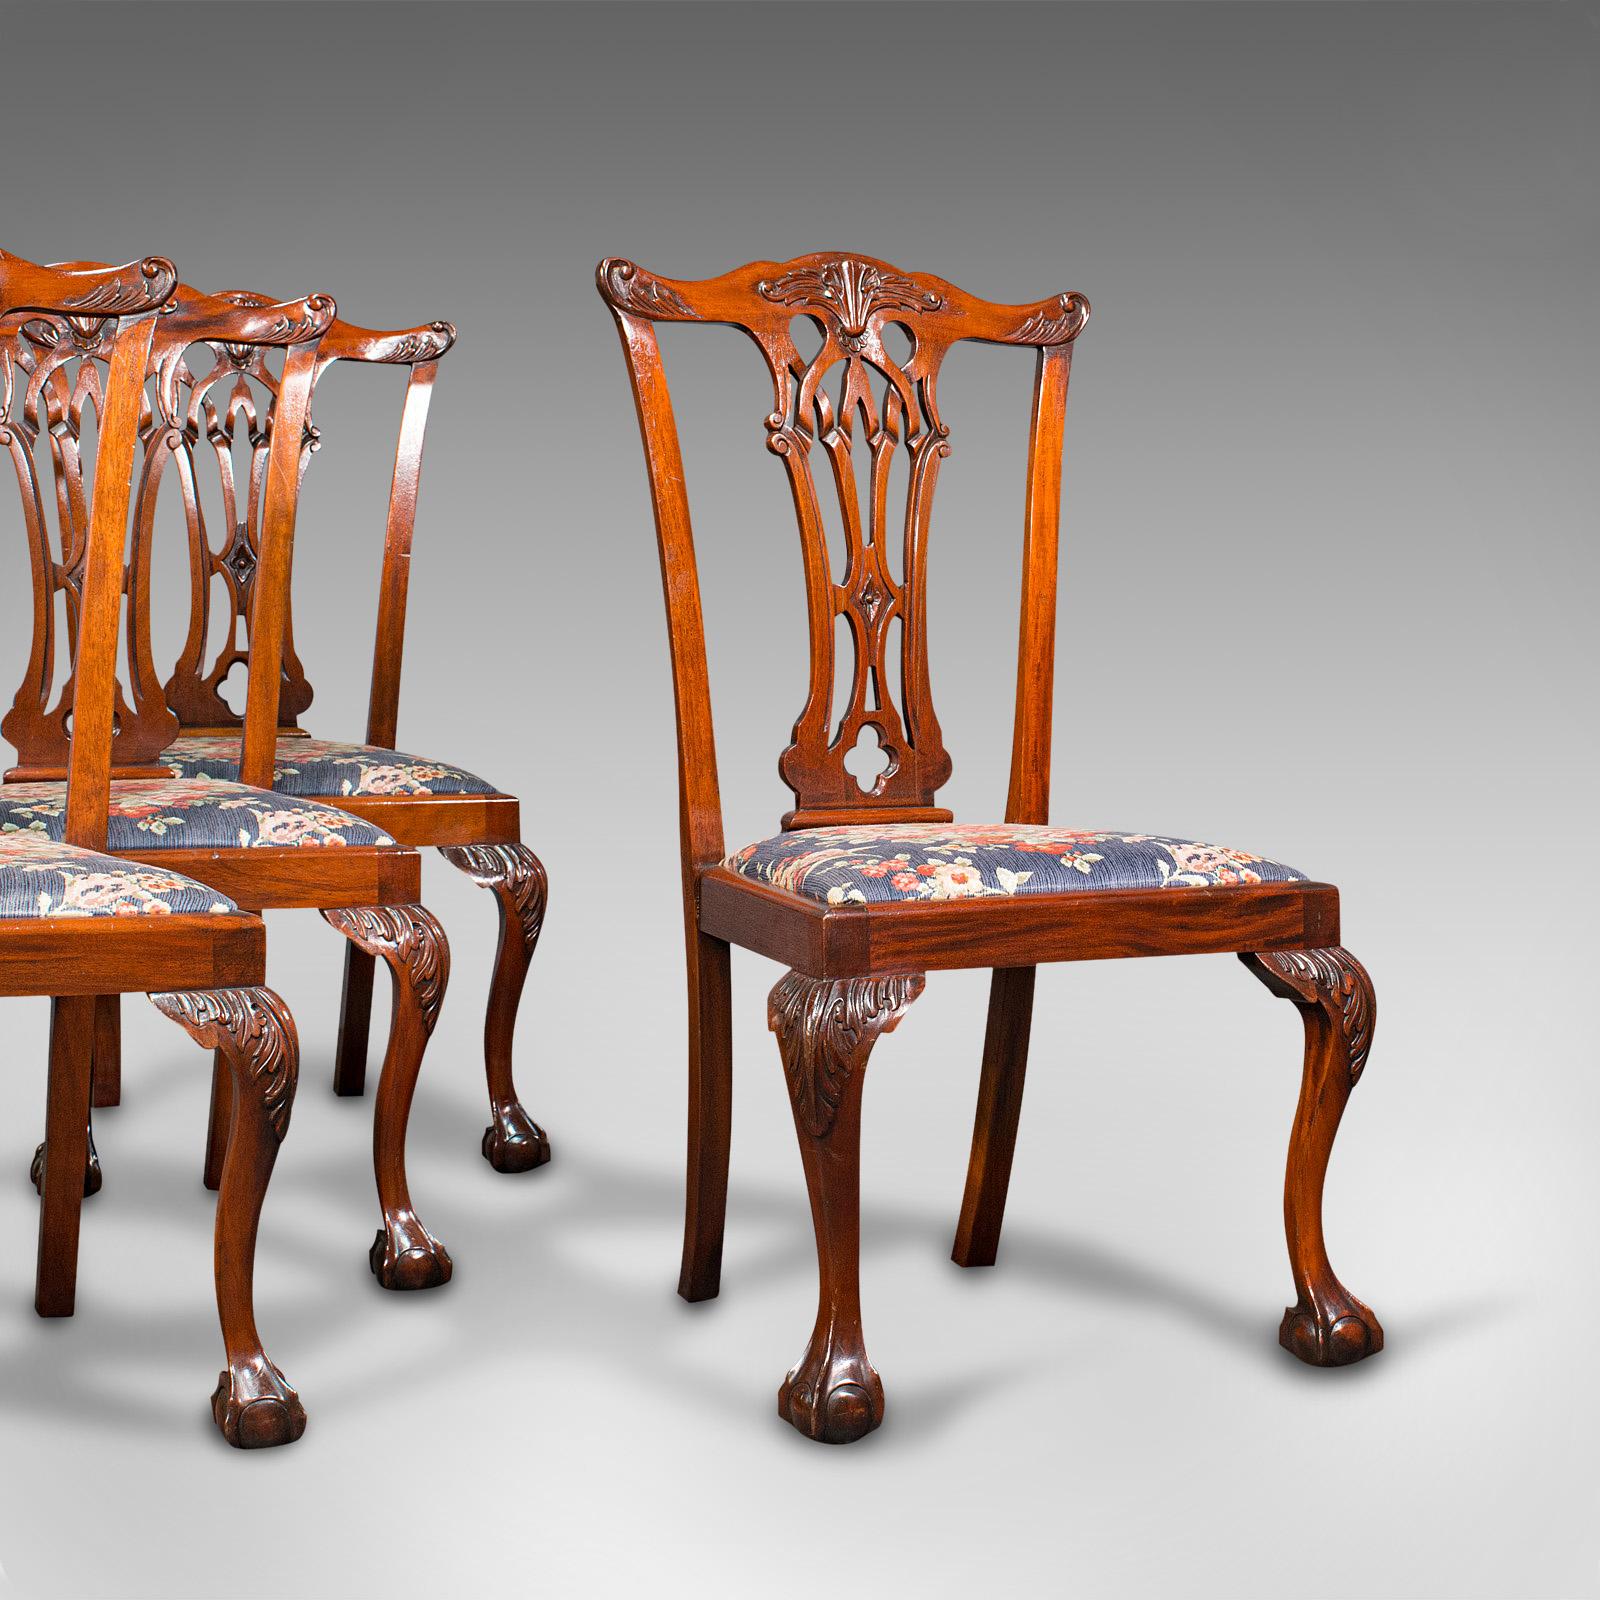 This is a set of 4 antique dining chairs. An English, quality mahogany seat in the manner of Chippendale, dating to the late Victorian period, circa 1900.

A suite of striking colour and fascinating detailing
Displays a desirable aged patina and